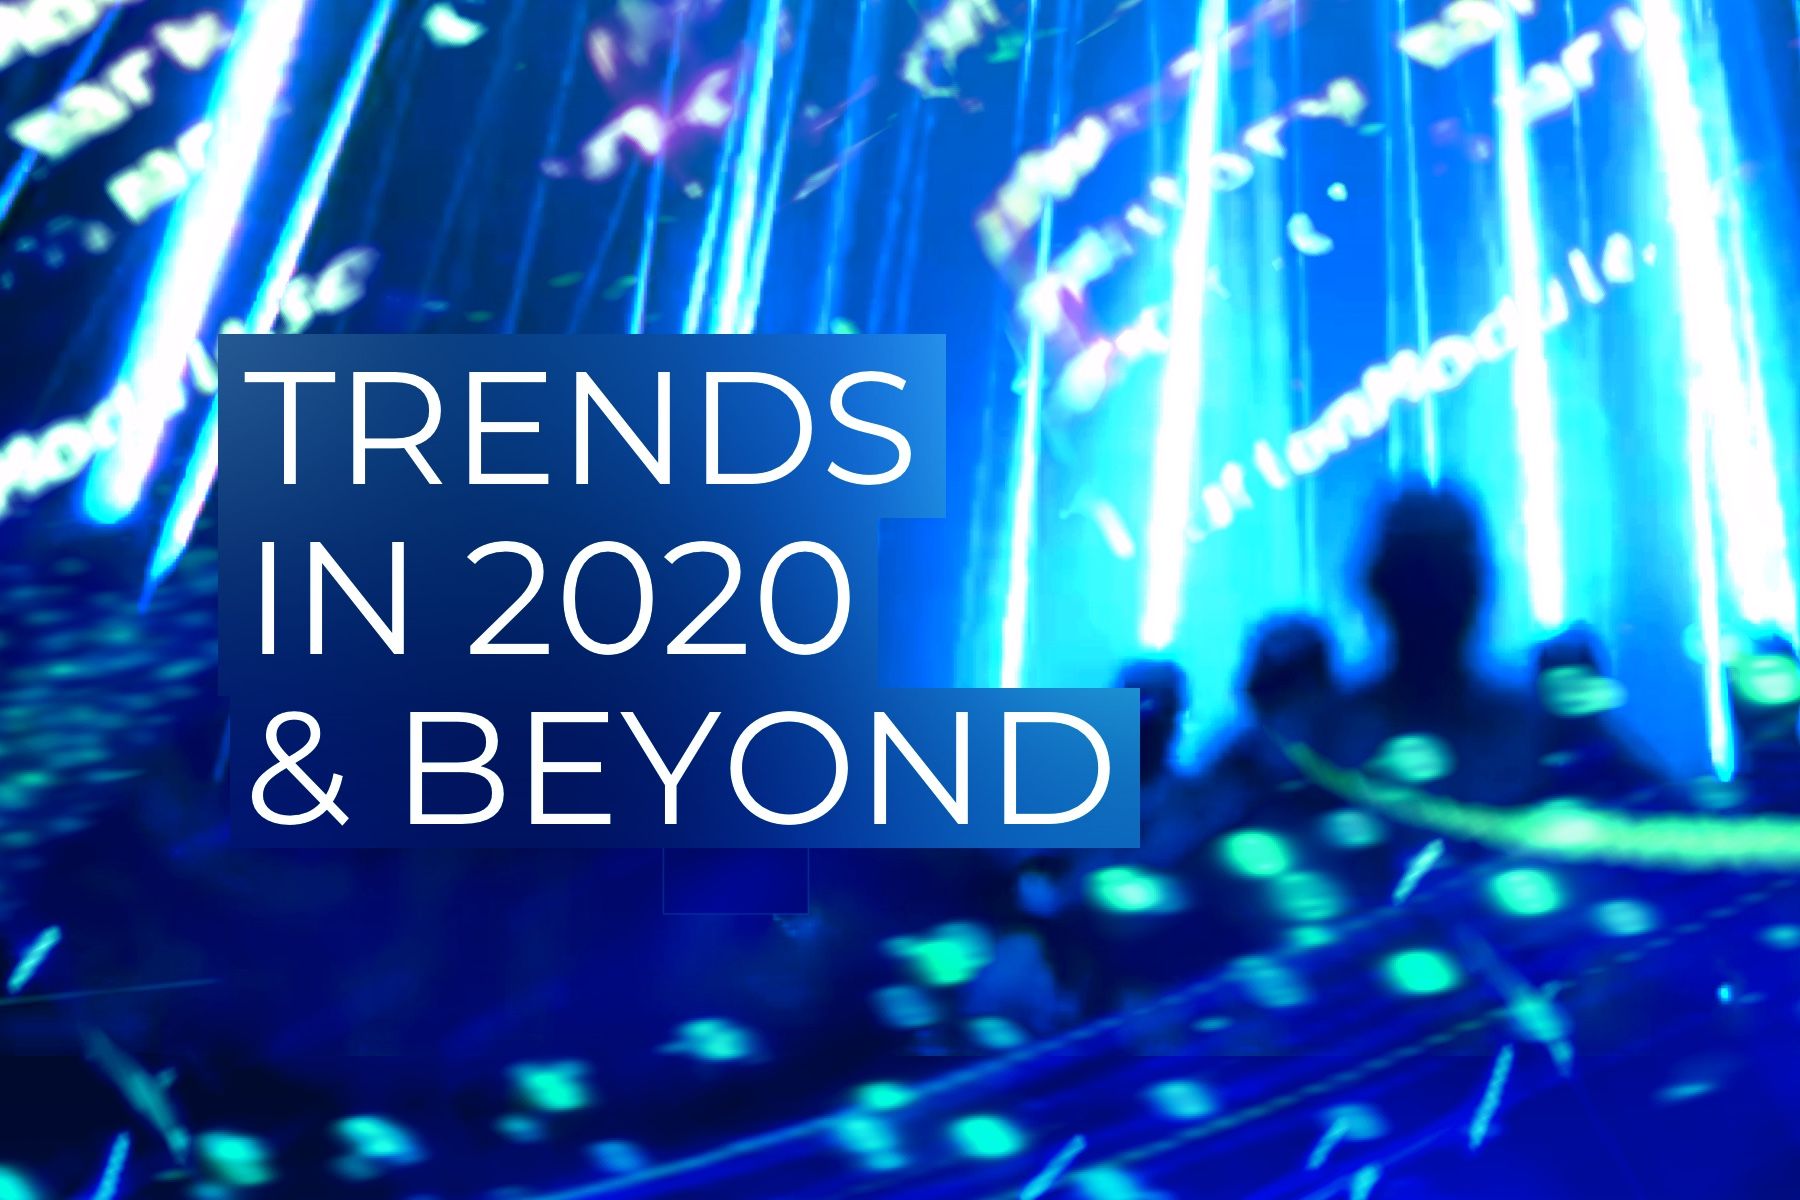 Digital asset trends in 2020 and beyond: DeFi, stablecoins, altcoins